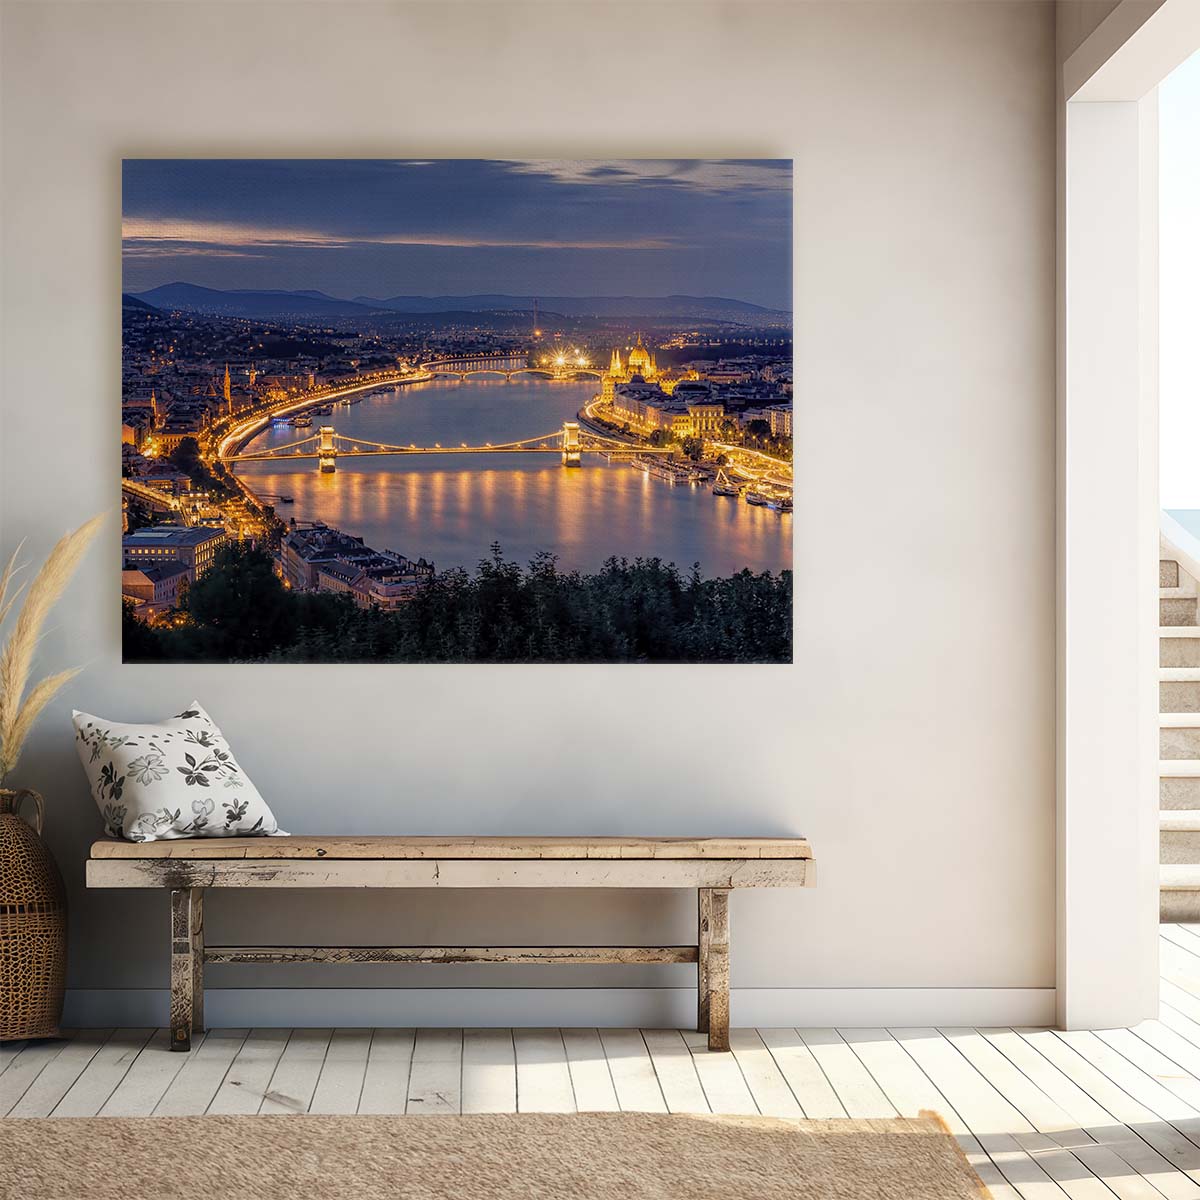 Budapest Sunset Skyline & Bridges Panoramic Wall Art by Luxuriance Designs. Made in USA.